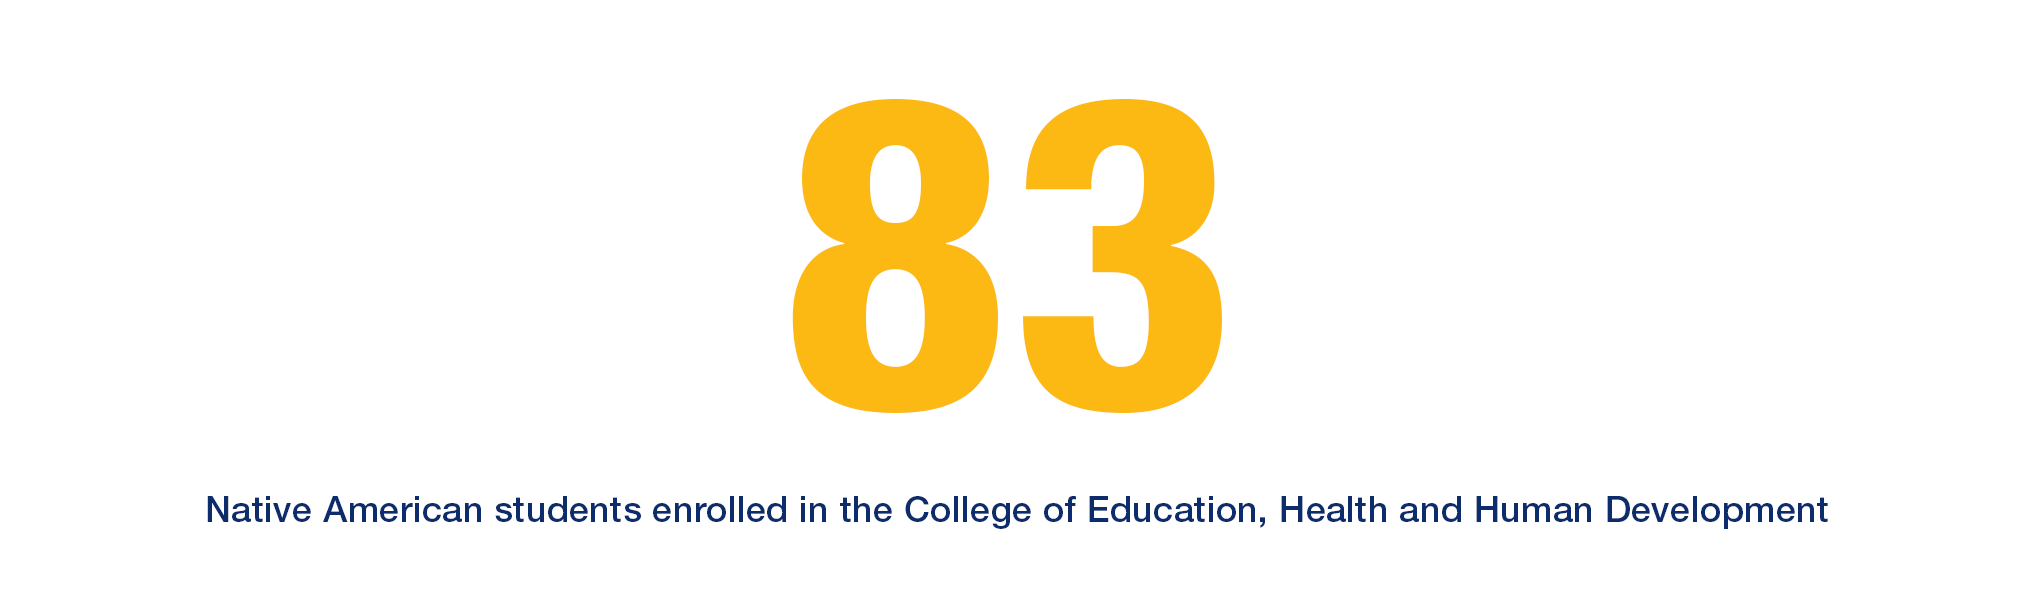 83 Native American students enrolled in the College of Education, Health and Human Development